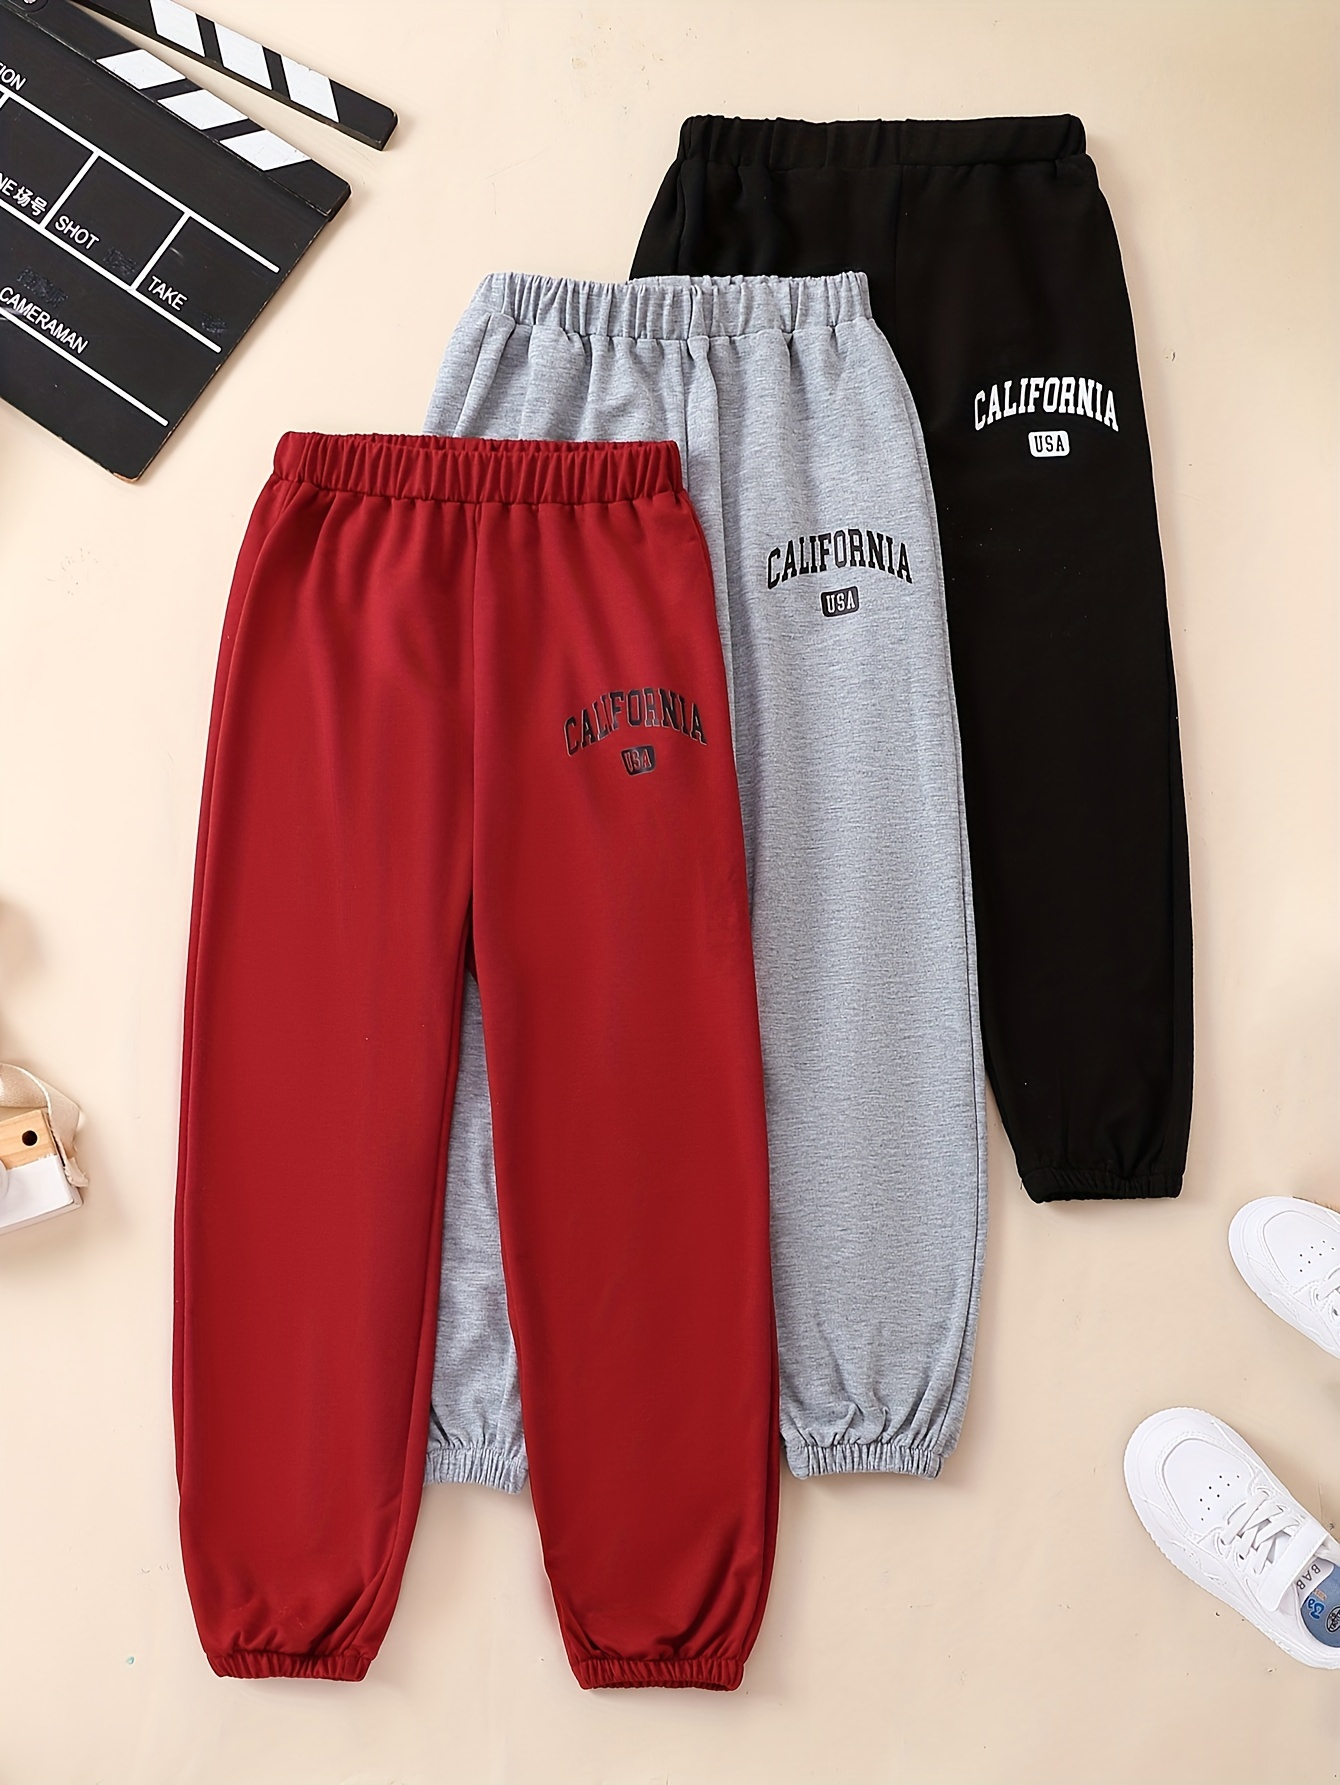 Hot Topic Social Collision Final Girl Icons Girls Sweatpants